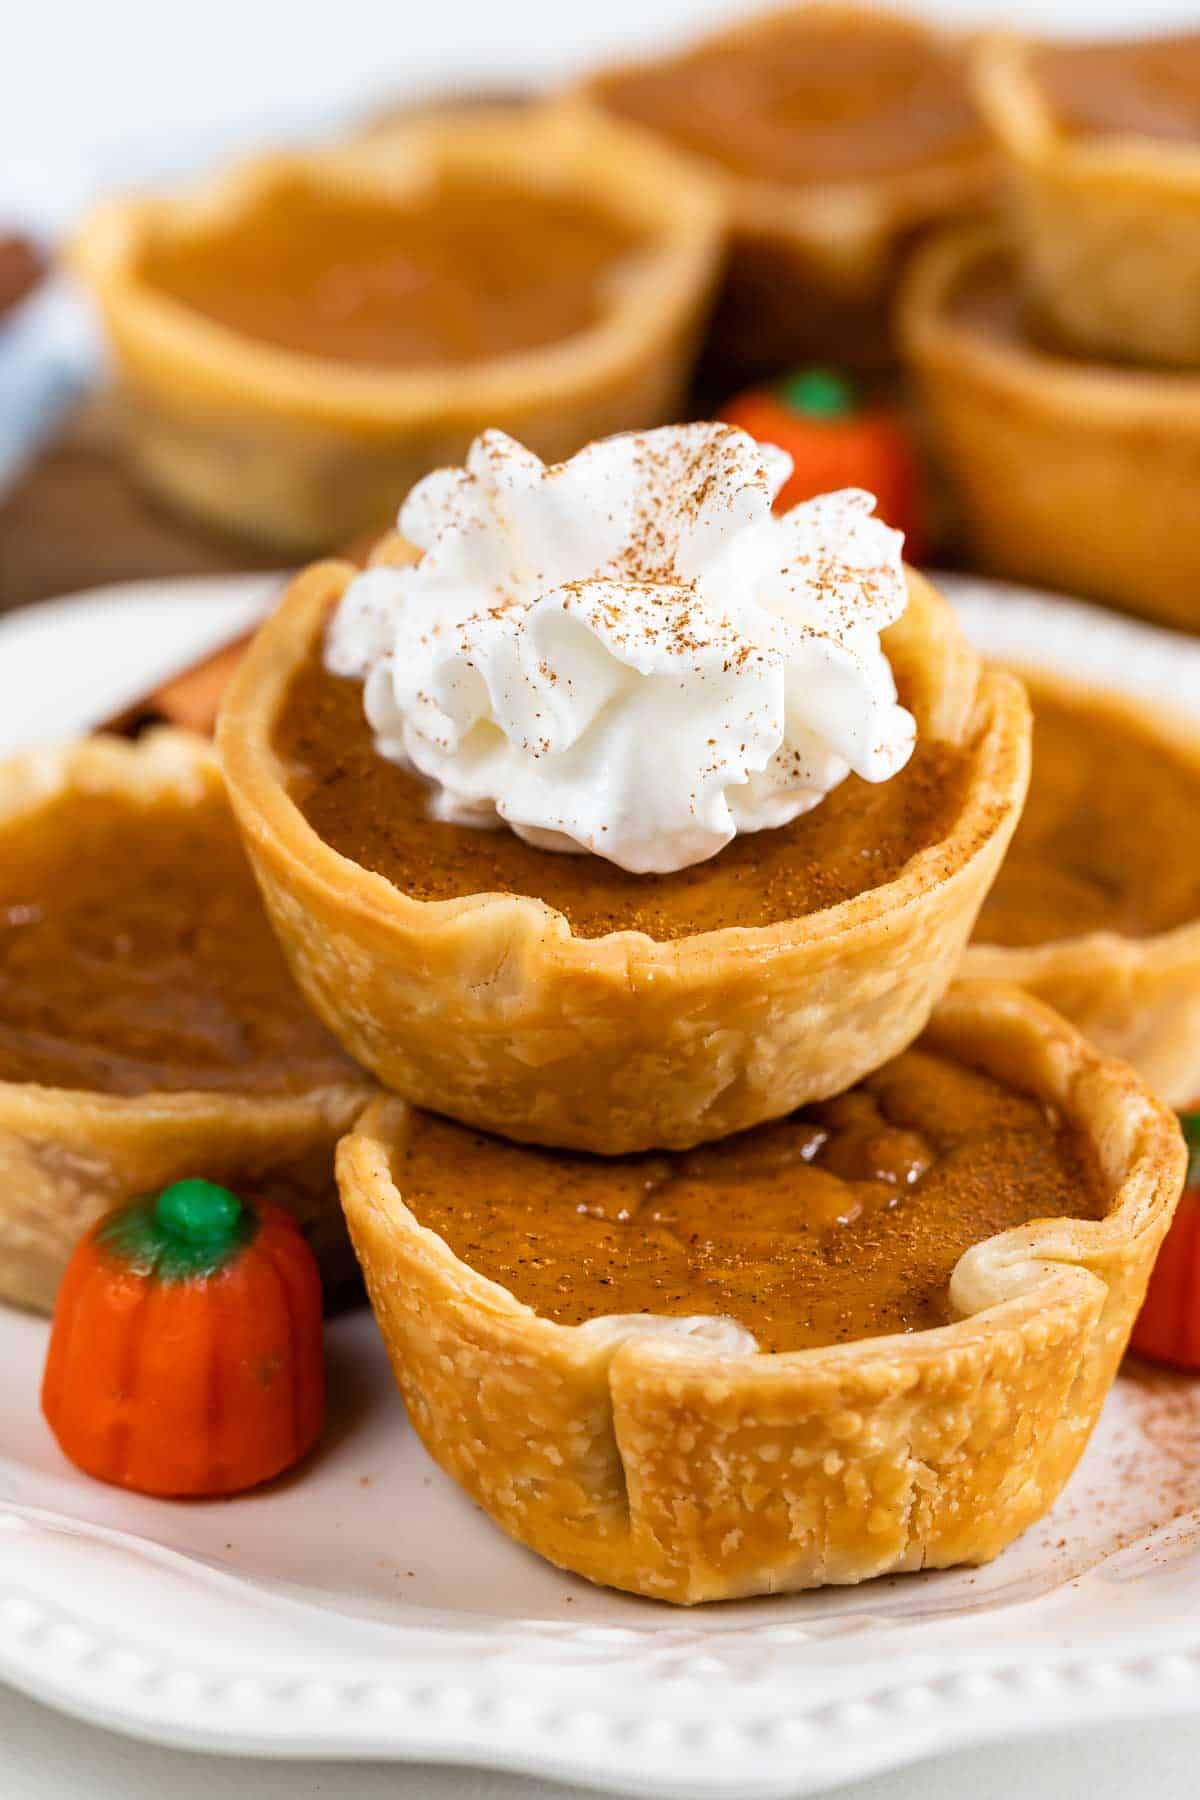 5 Other Pans to Bake a Pumpkin Pie In